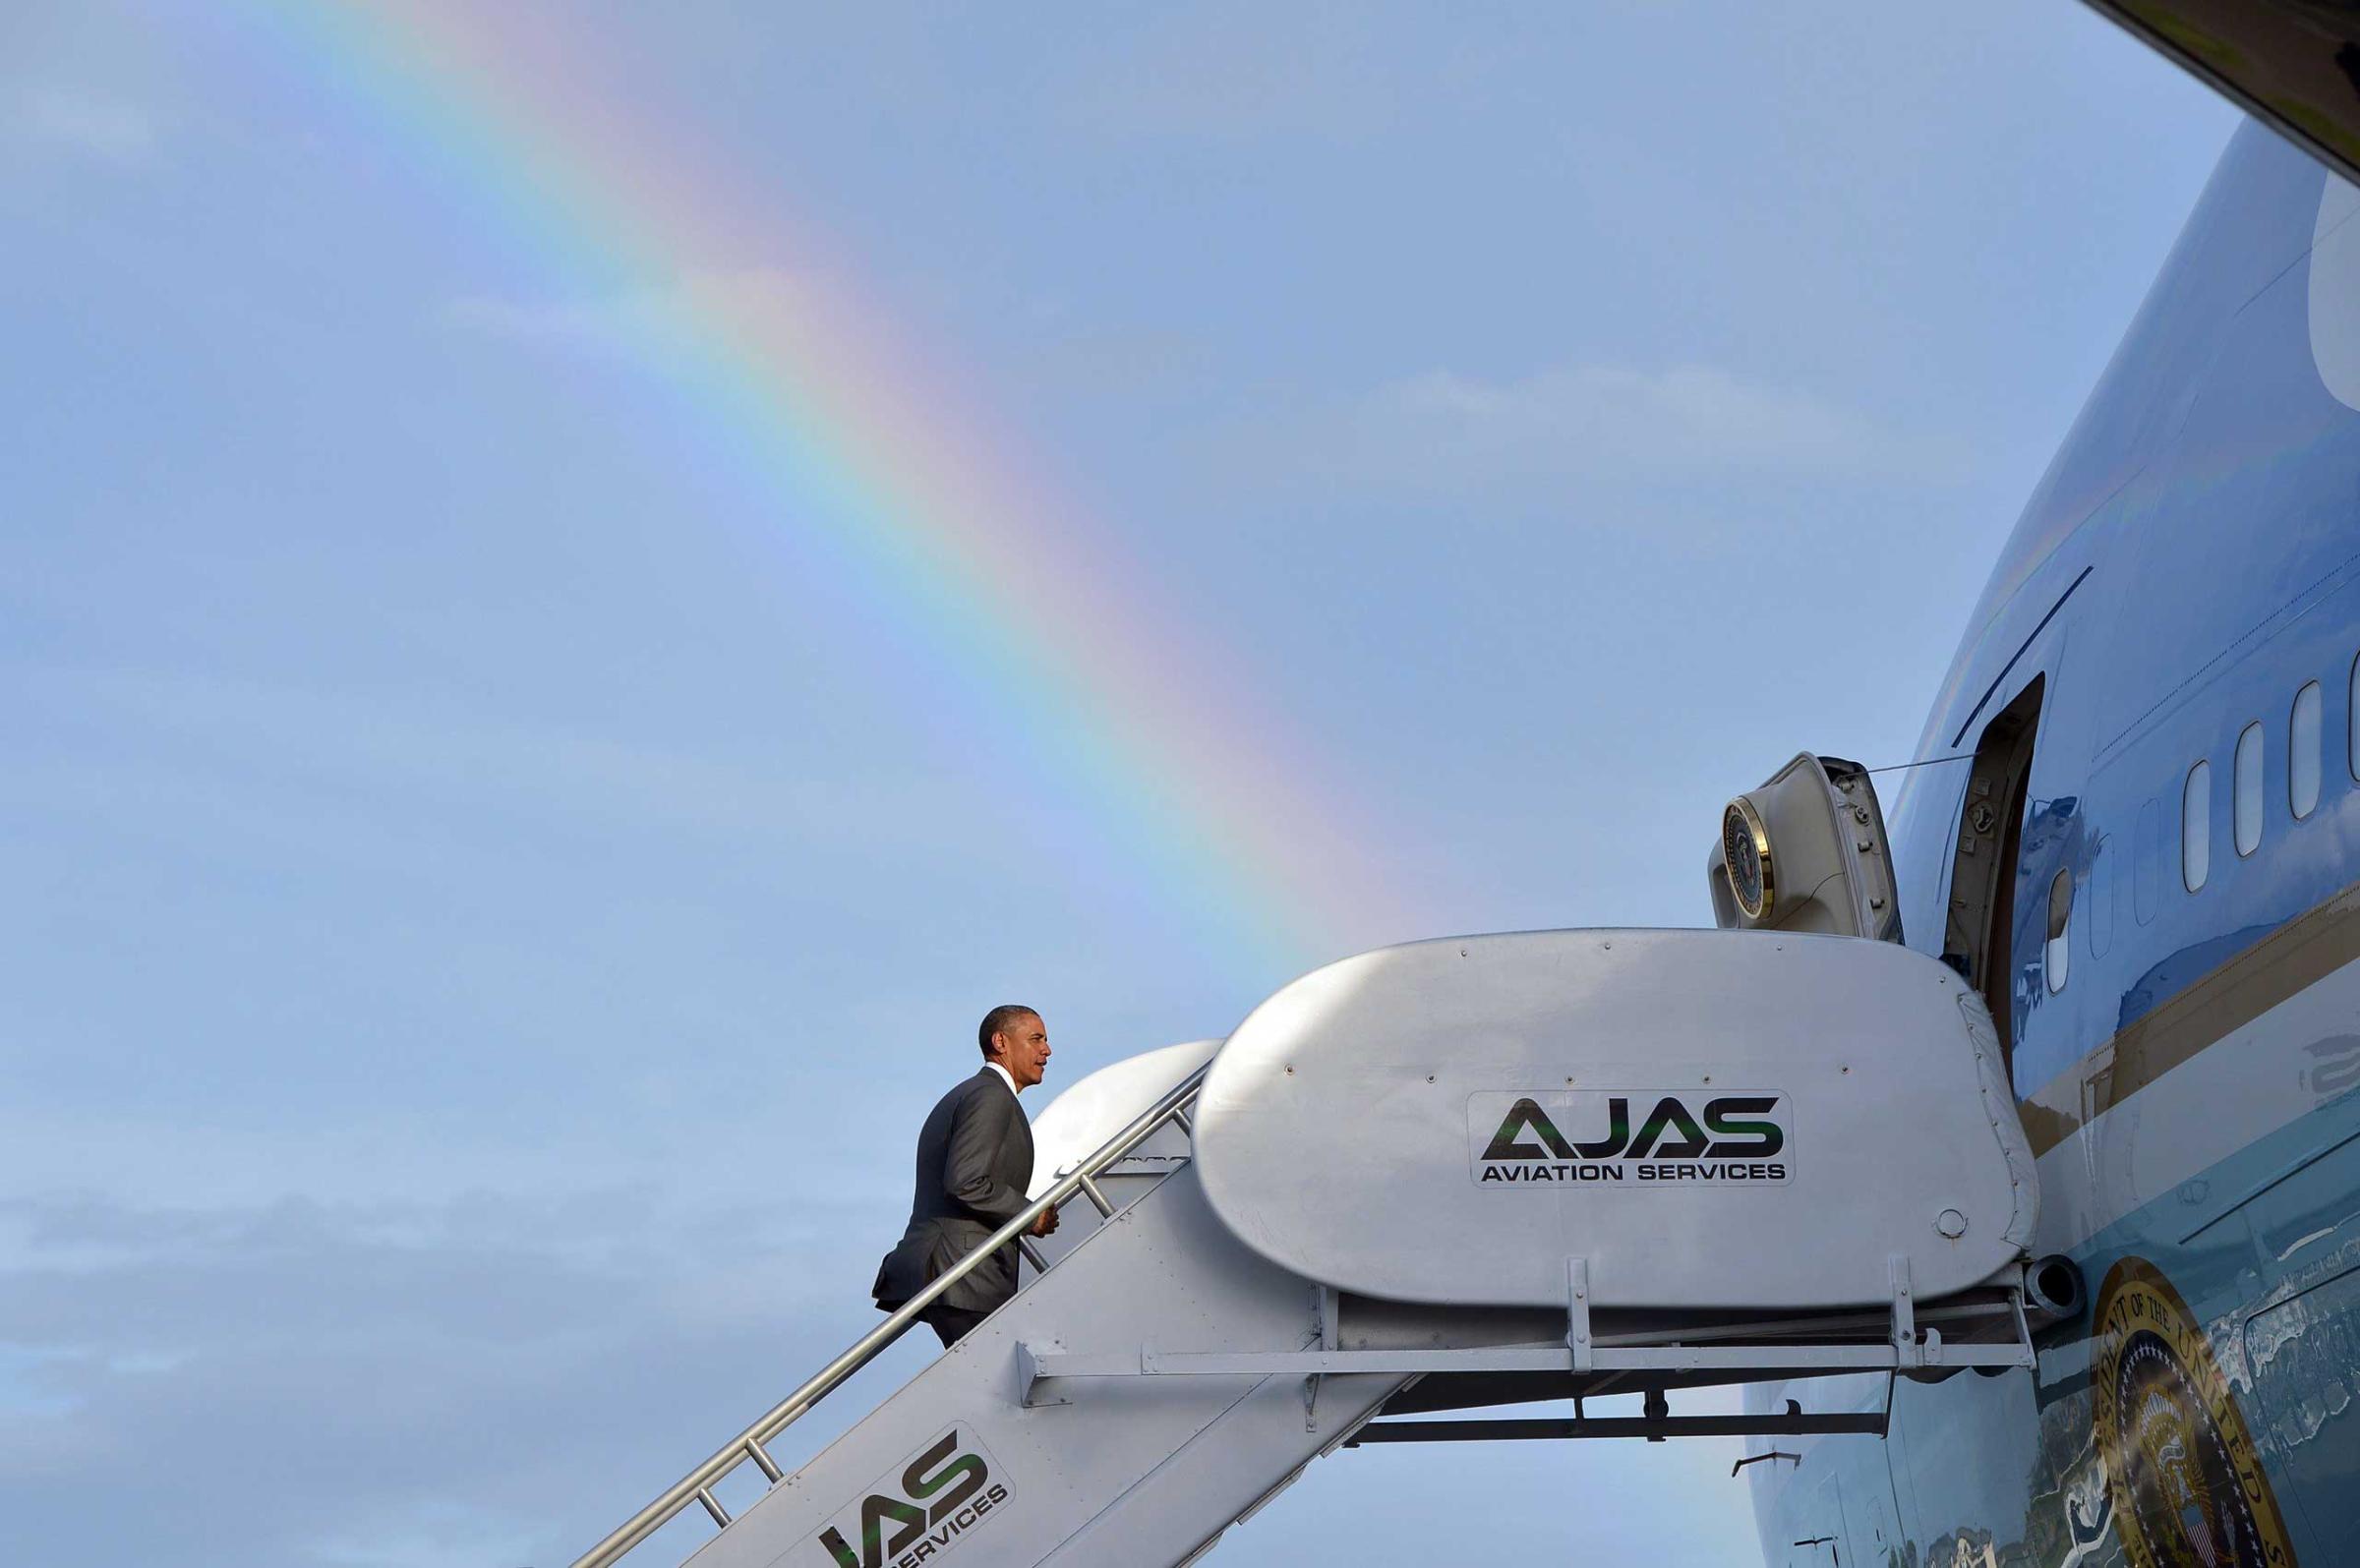 US President Barack Obama makes his way to board Air Force One under a rainbow upon departure from Kingston, Jamaica on April 9, 2015.